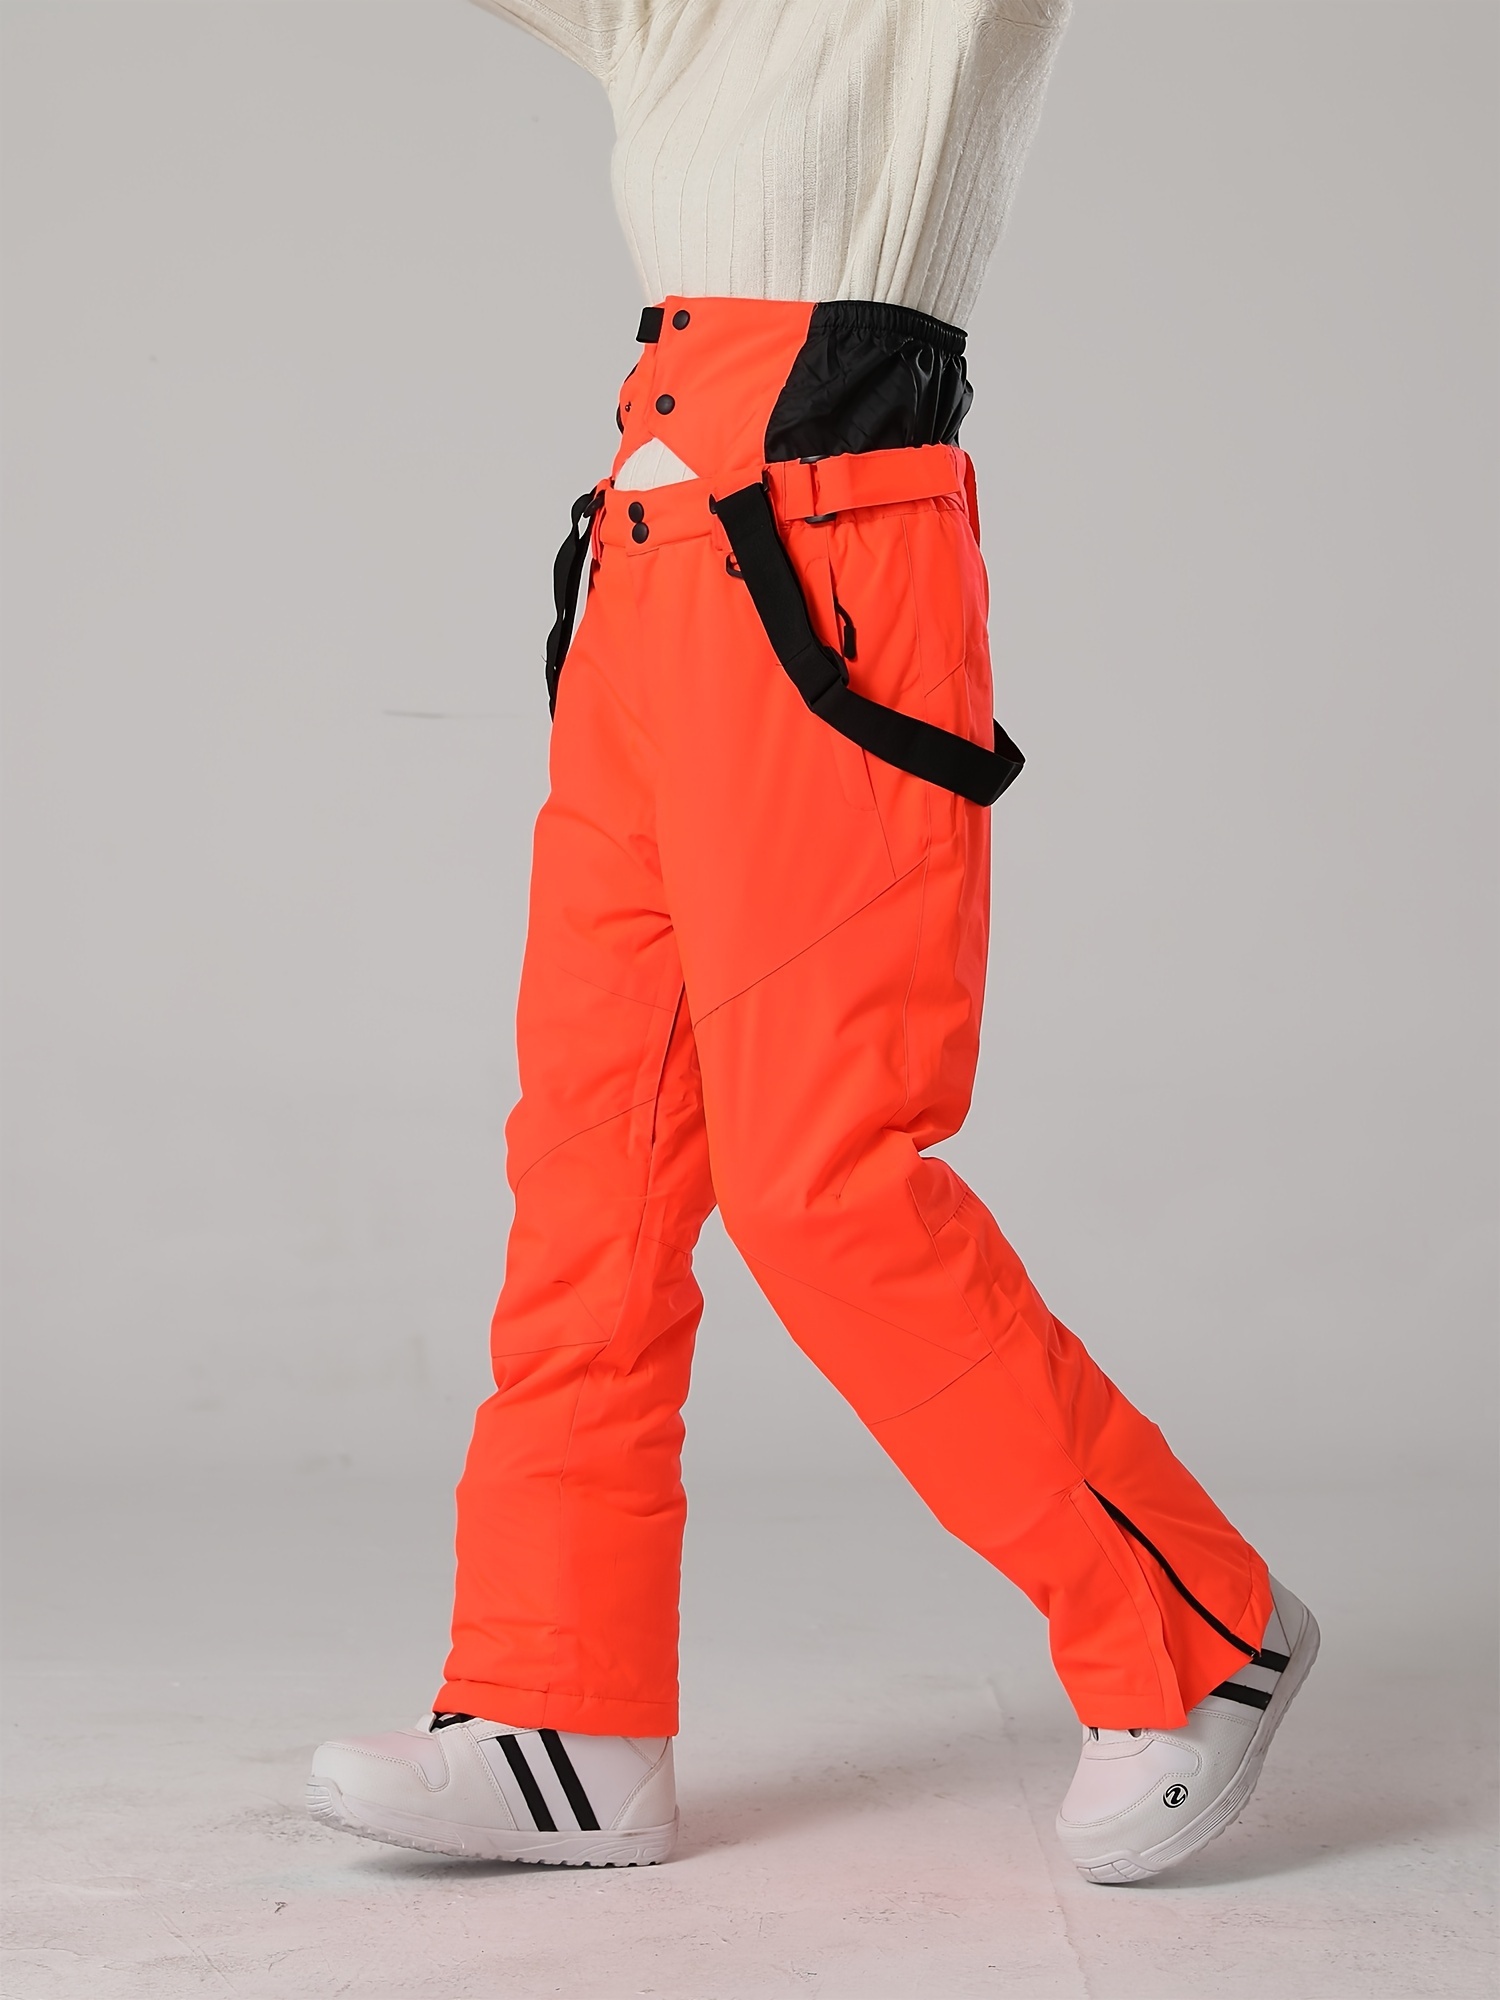 Ski trousers for women, snow trousers with braces, thermal outdoor  trousers, braces, waterproof, windproof, softshell trousers, warm lined,  snowboard trousers, hiking trousers, winter ski pants, : :  Fashion